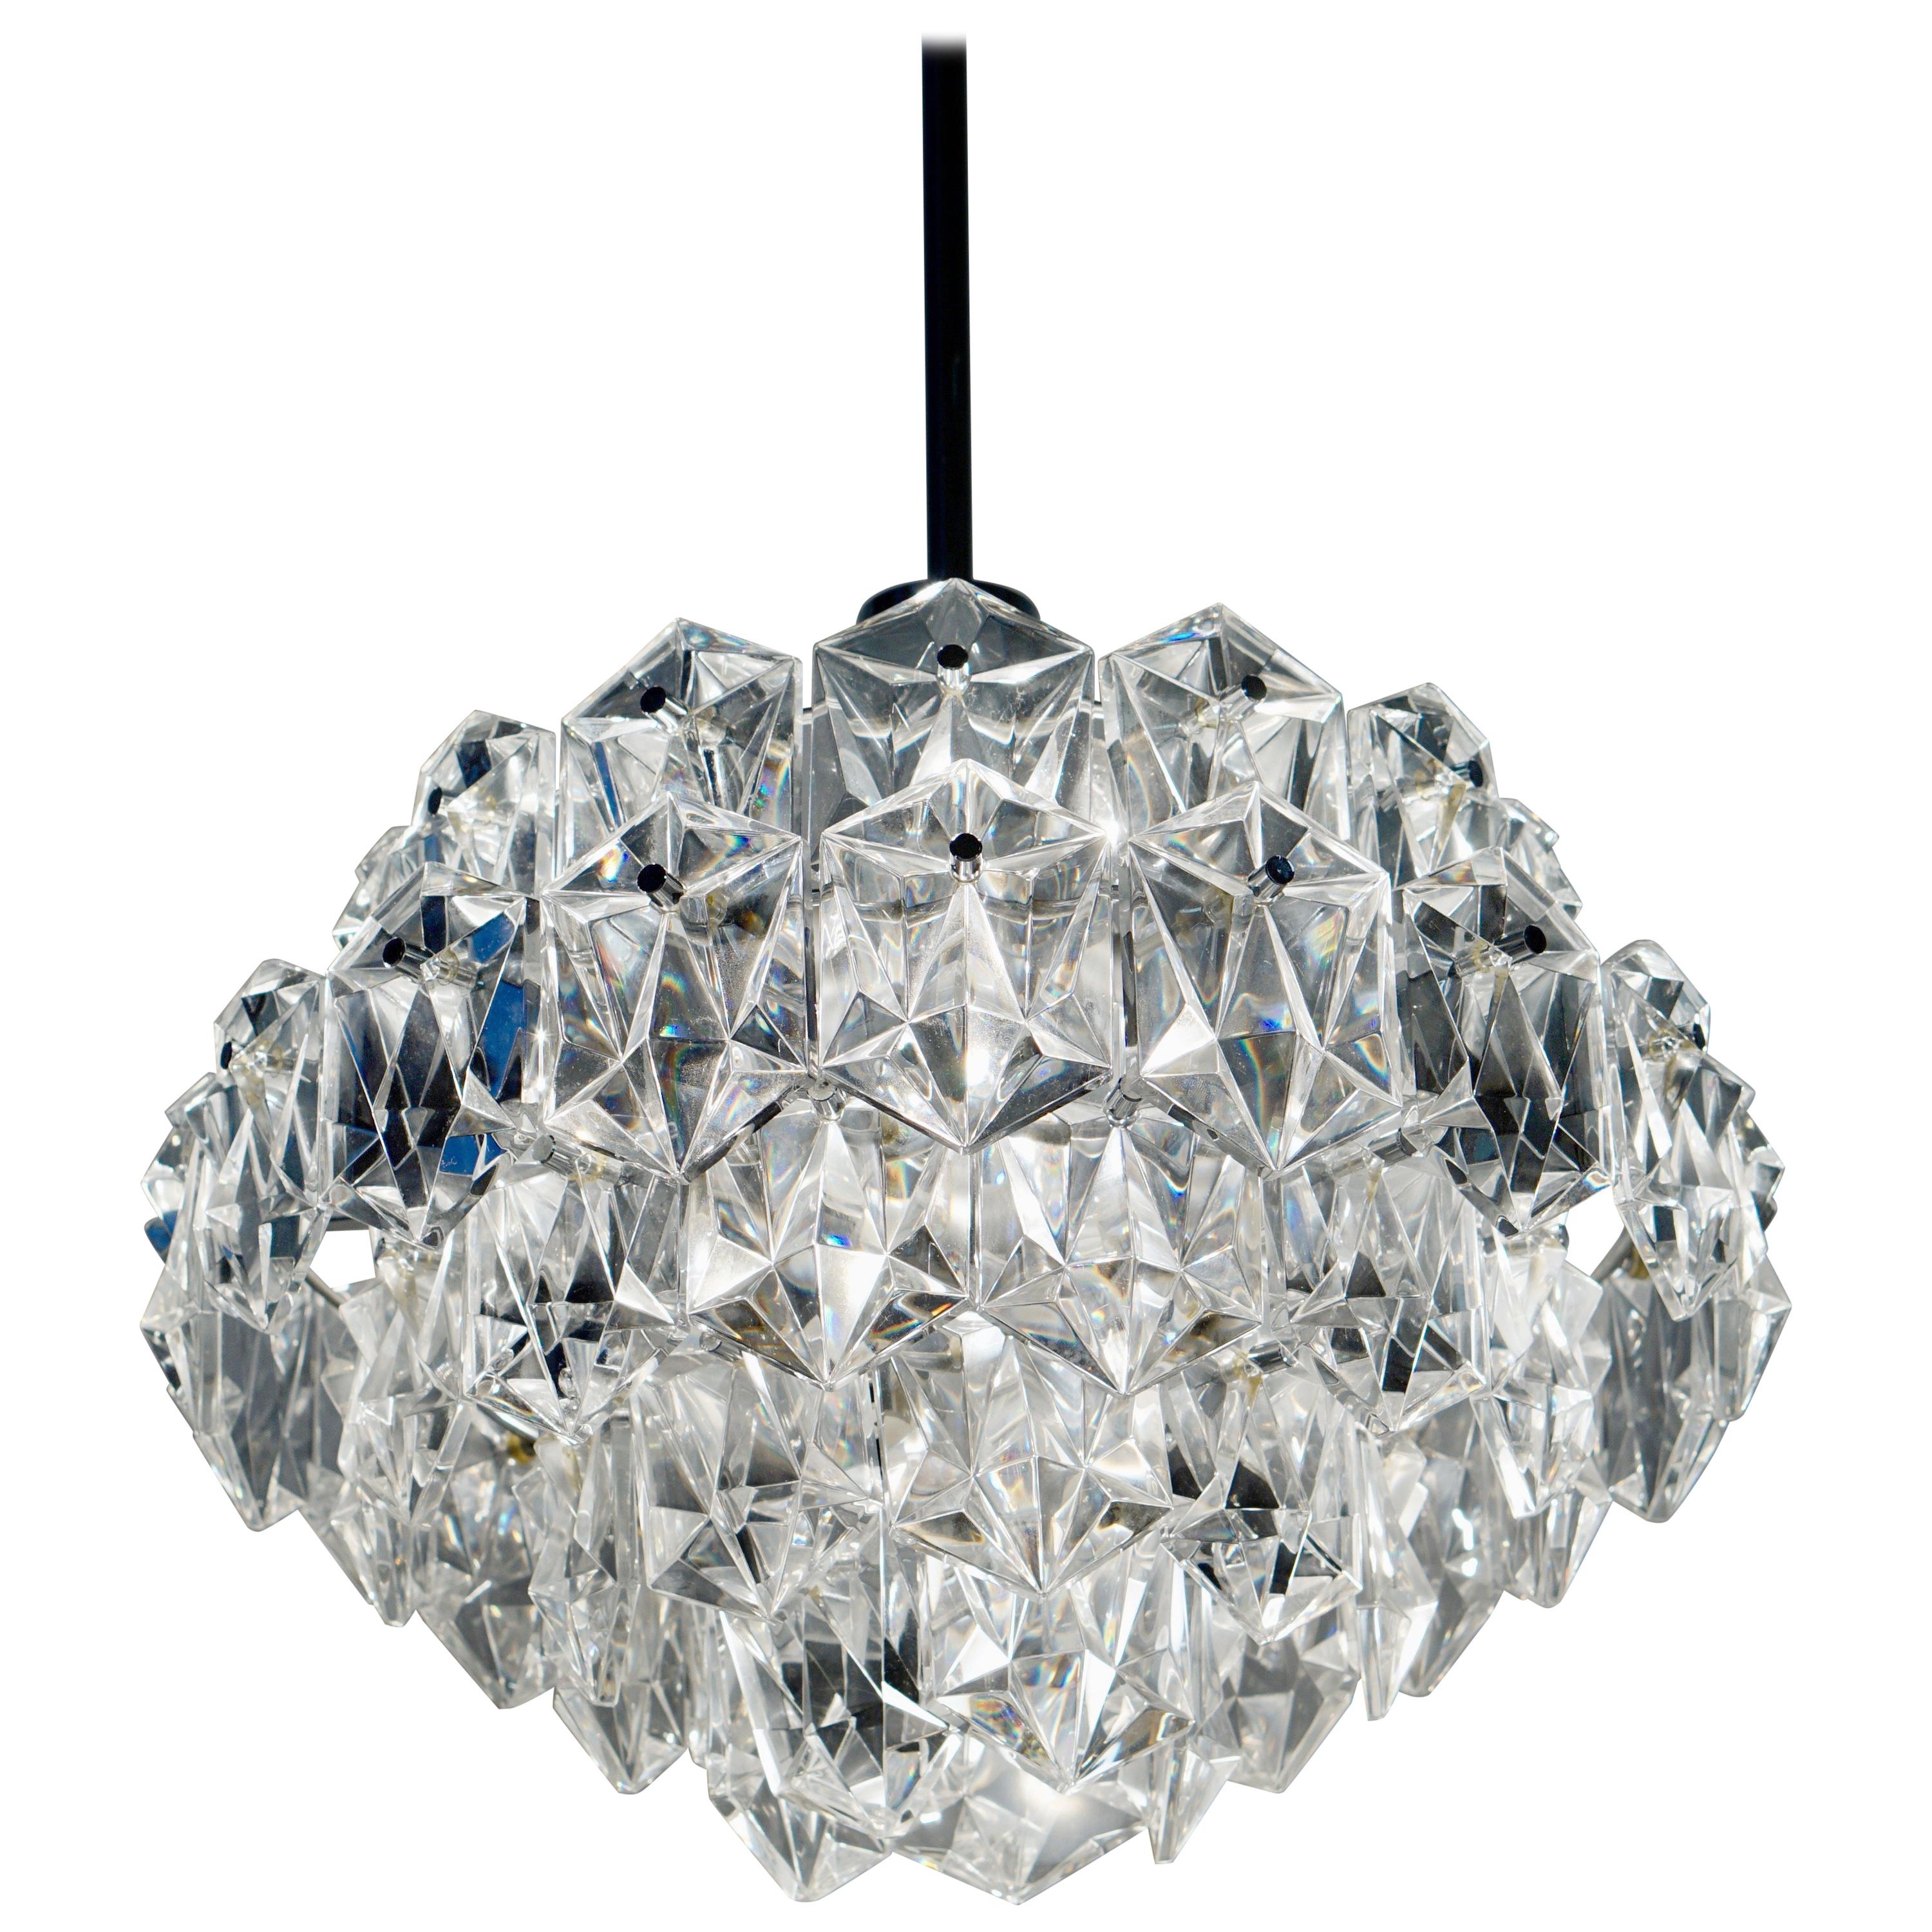 Chandelier Made Out of Cut Crystal Glasses For Sale